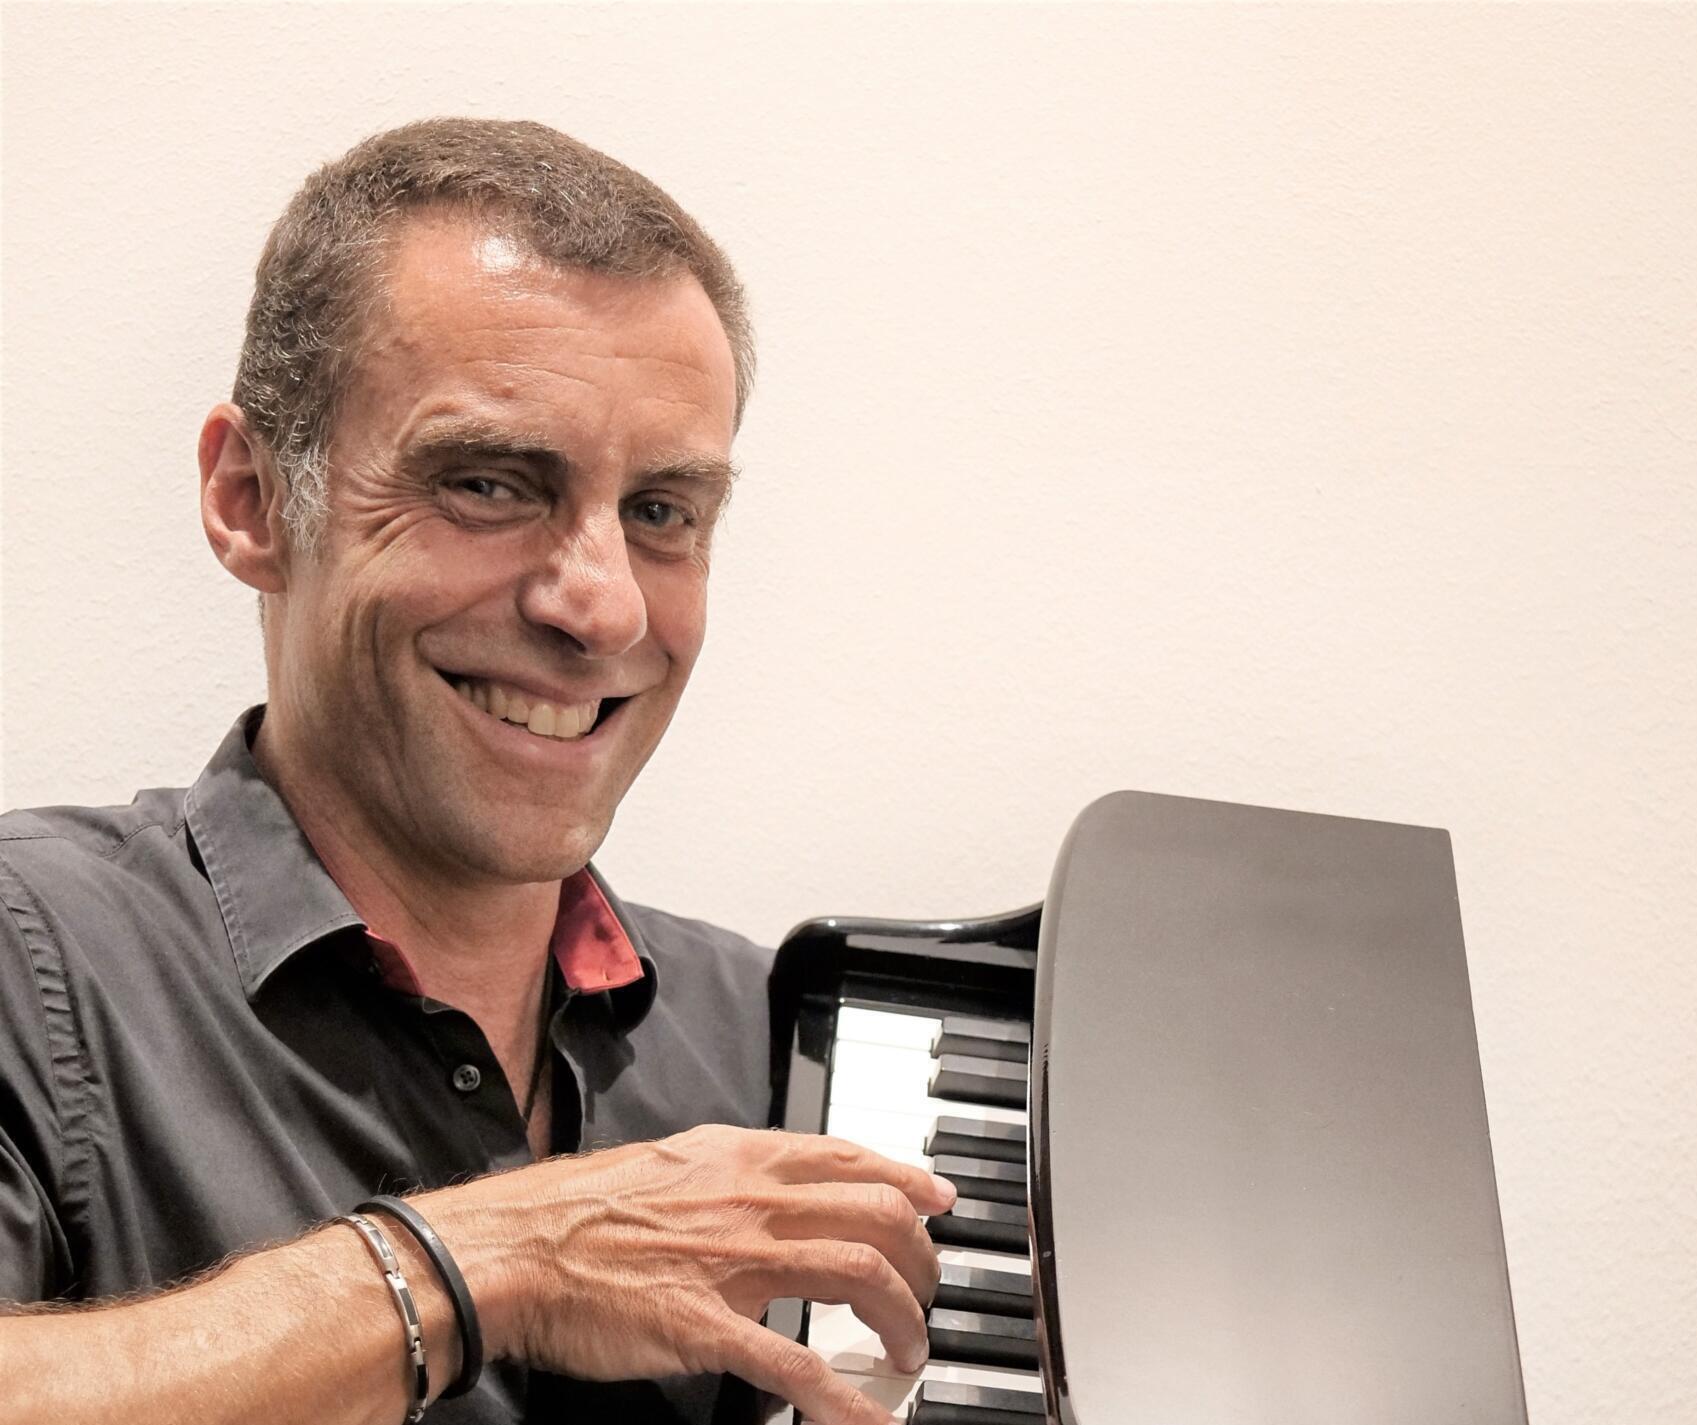 Picture of cabaret artist Martin Schmitt. He is wearing black clothing, smiling at the camera and holding a miniature piano.